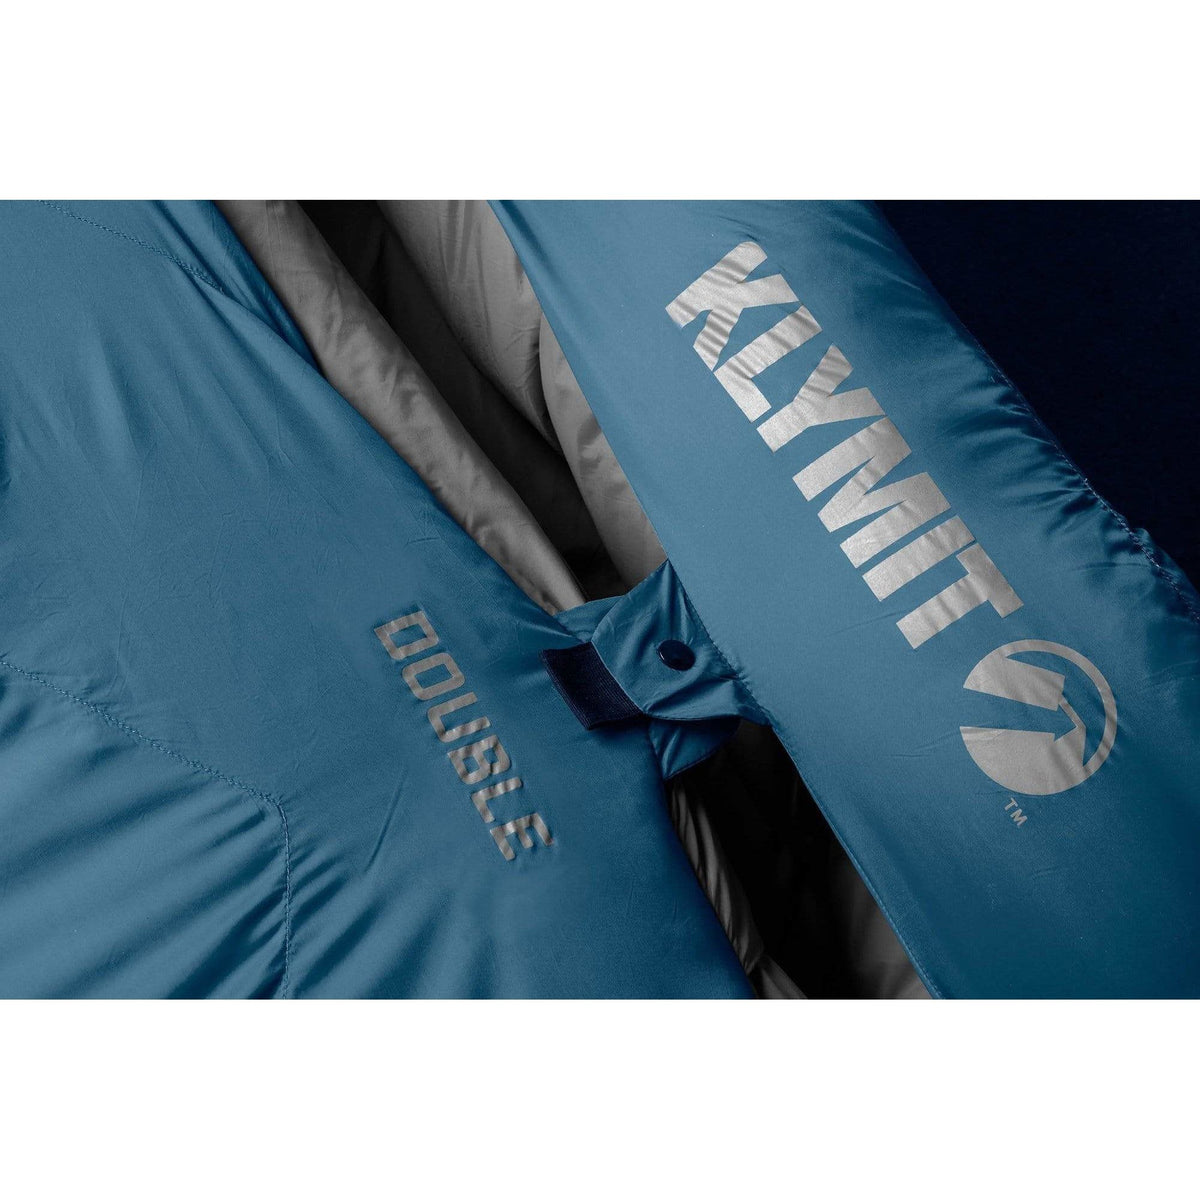 Klymit Camping Gear 30 Degree Two Person Full-Synthetic Sleeping Bag by Klymit